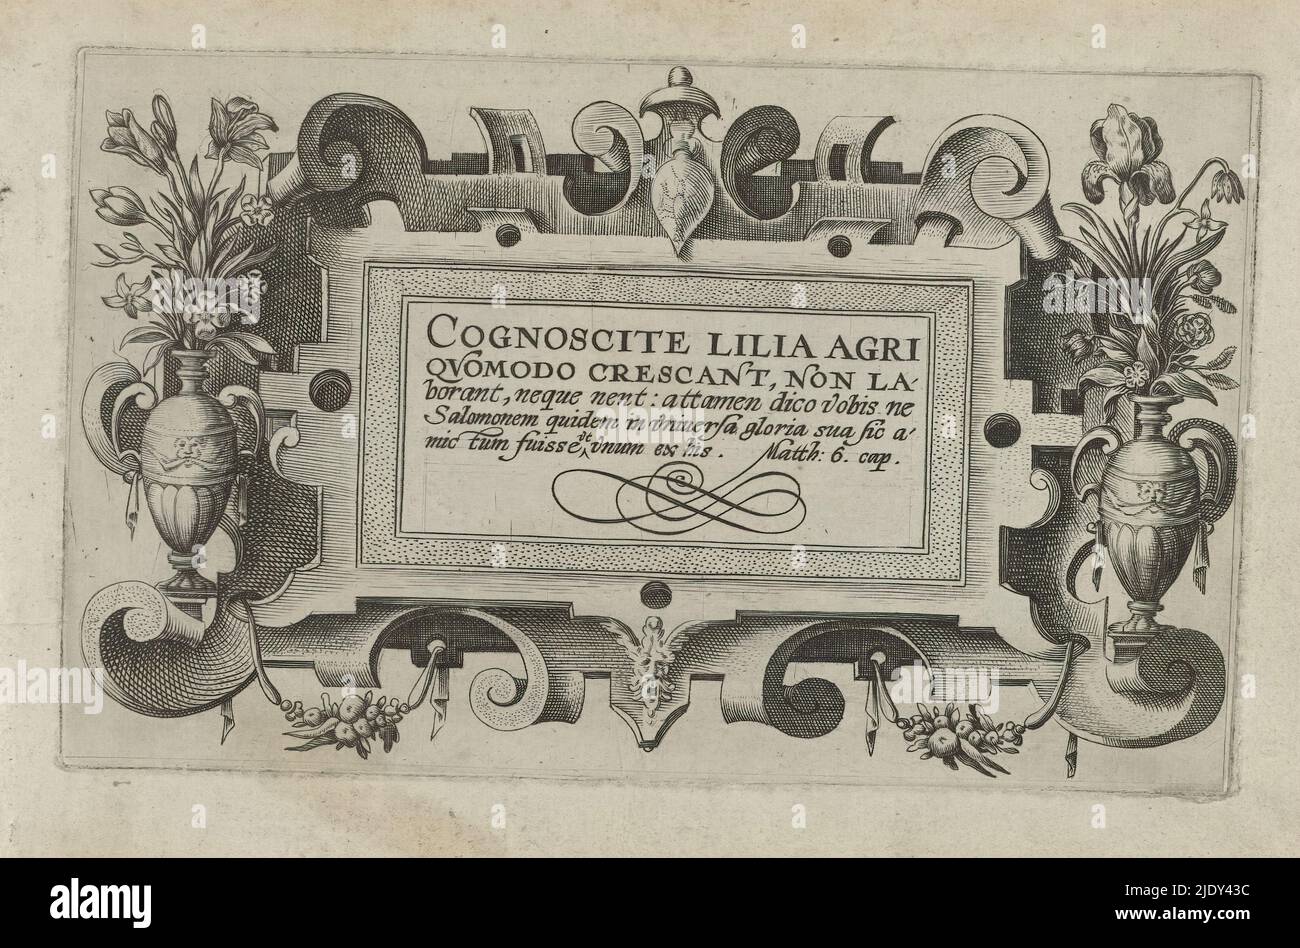 Title Page and Eleven Prints of Flowers, Plants, and Fruit, Cartouche with framed scrollwork for the series: Cognoscite lilia, Cognoscite lilia (series title on object), Cartouche with framed scrollwork. Used as the title print of the series, titled: Cognoscite lilia agri quomodo crescant, non laborant, neque nent: attamen dico vobis ne Salomonem quidem in universa gloria sua sic amic tum fuisse et unum ex his. That is: Behold the lilies in the field, watch them grow. They do not work or weave. The lilies do not spin. I tell you: even Solomon, in all his splendor, did not go about dressed like Stock Photo